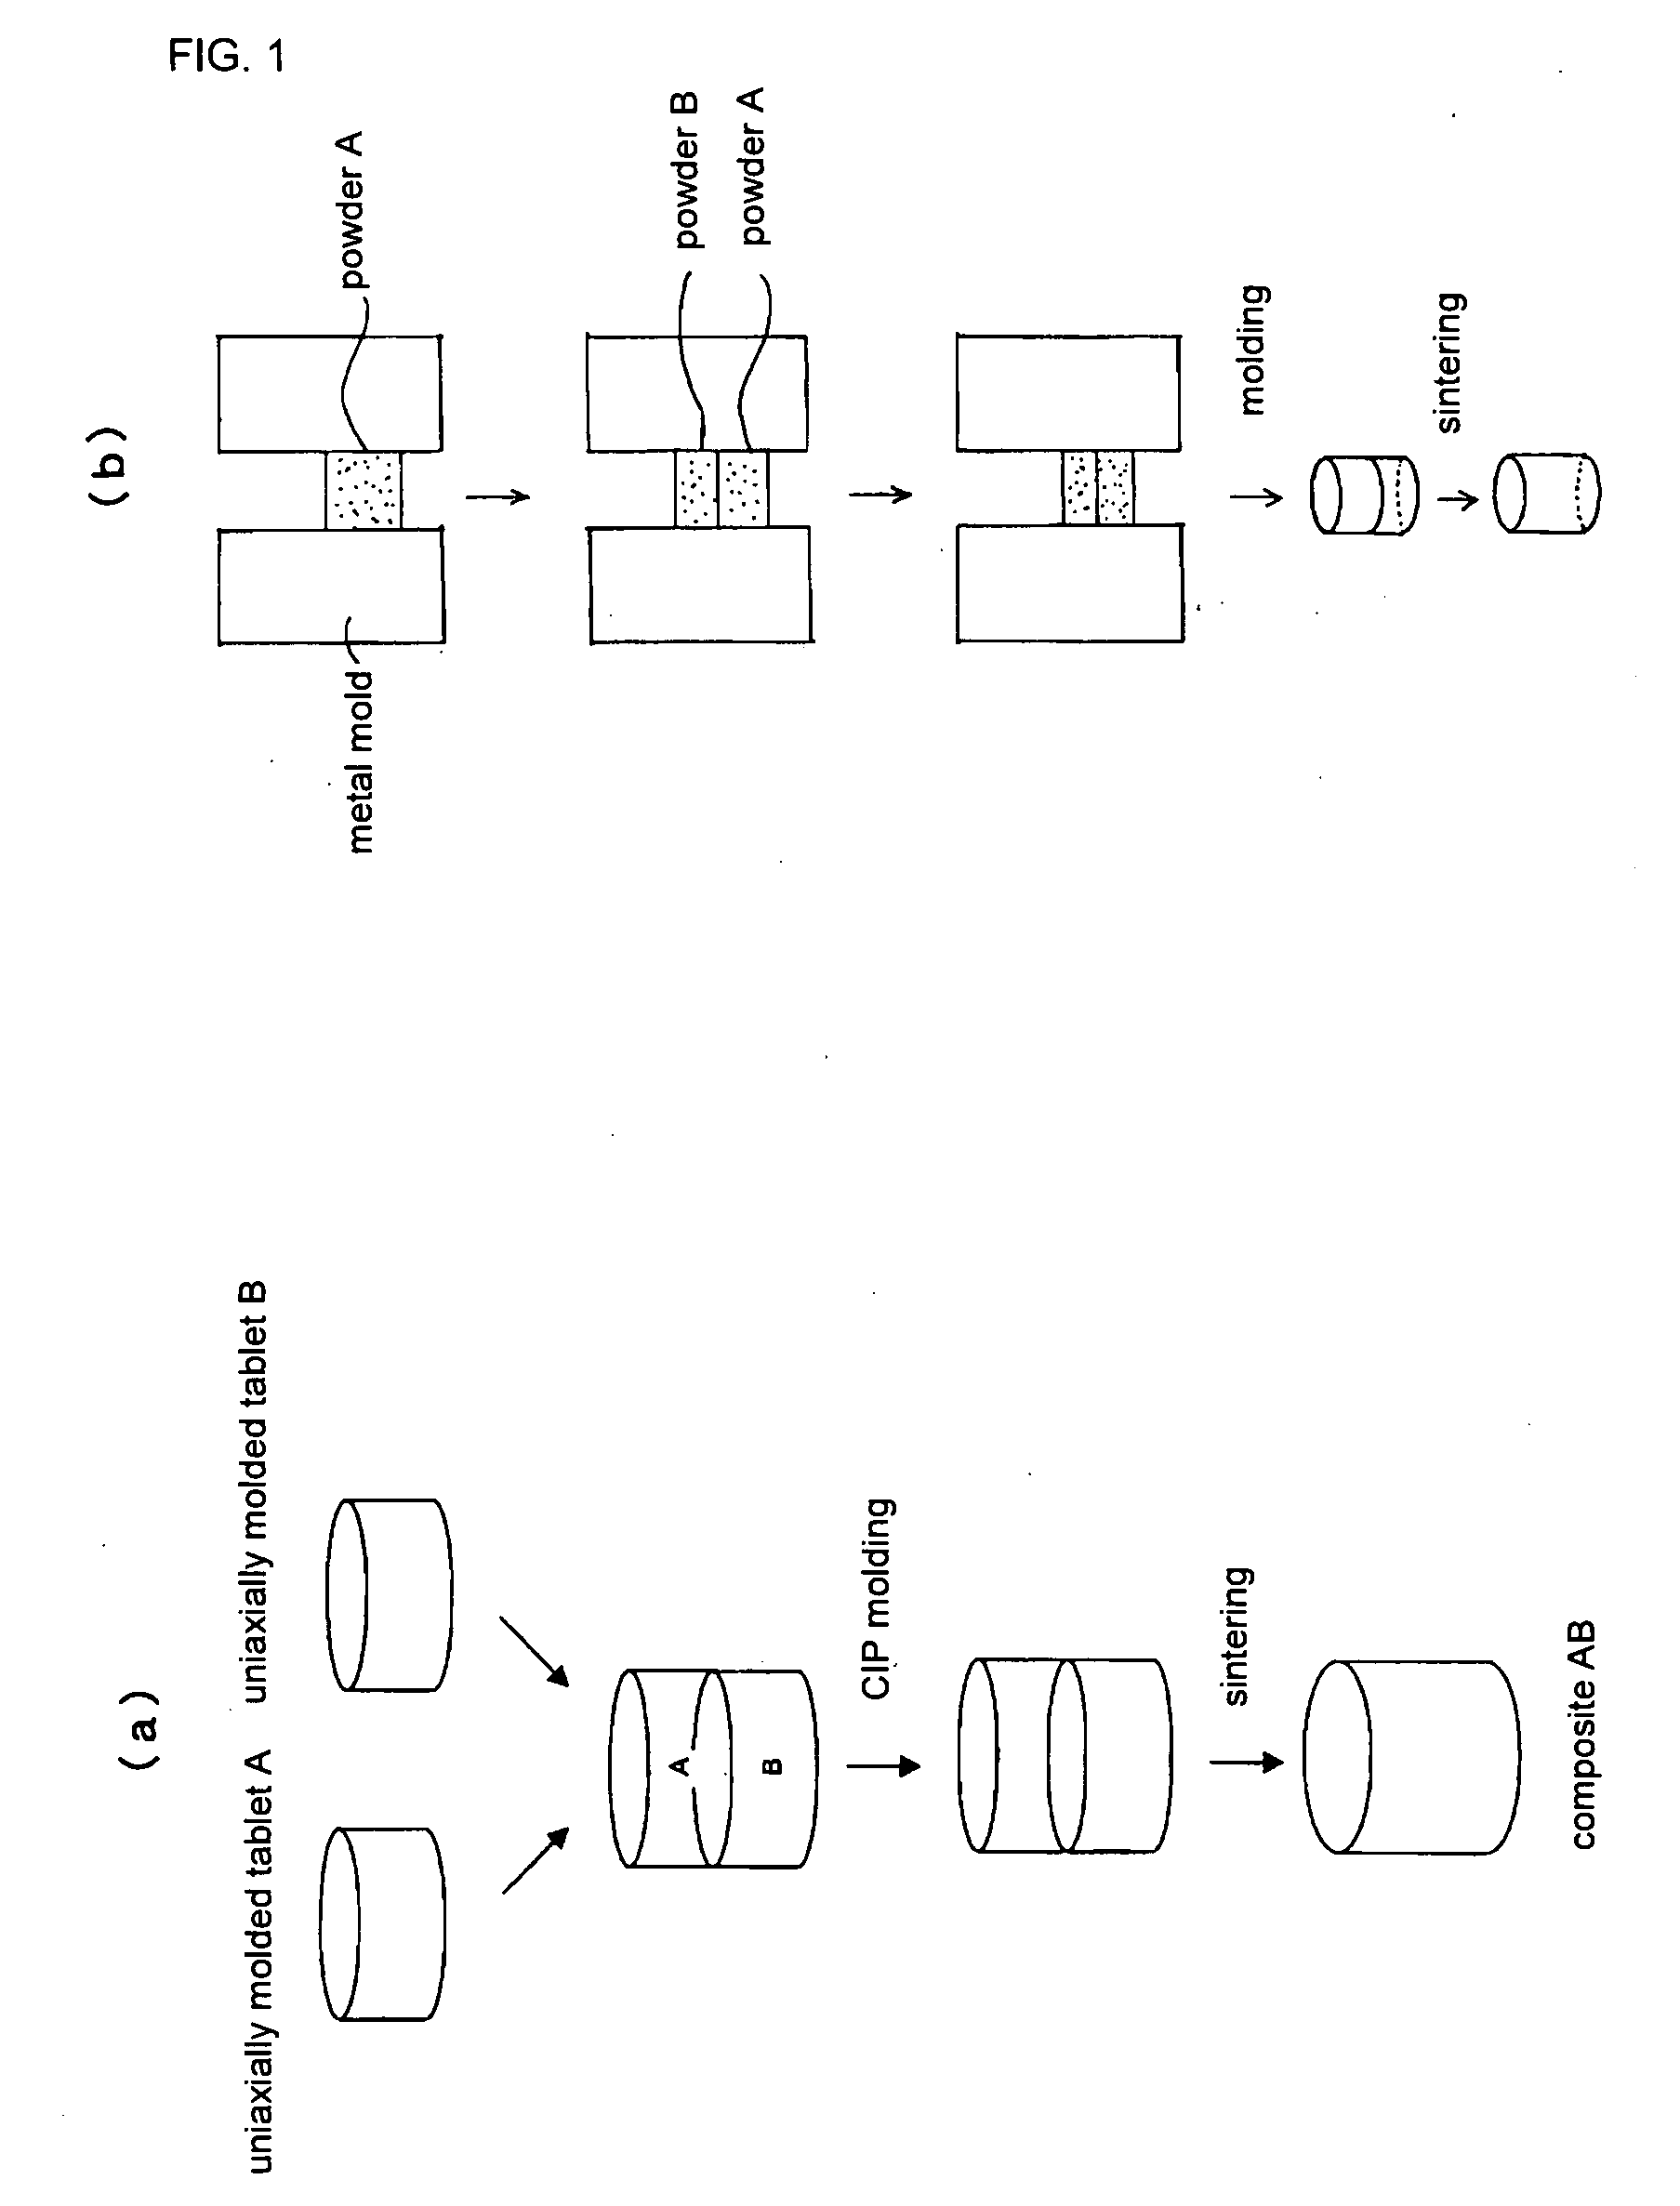 Composite Laser Element and Laser Oscillator Employing It